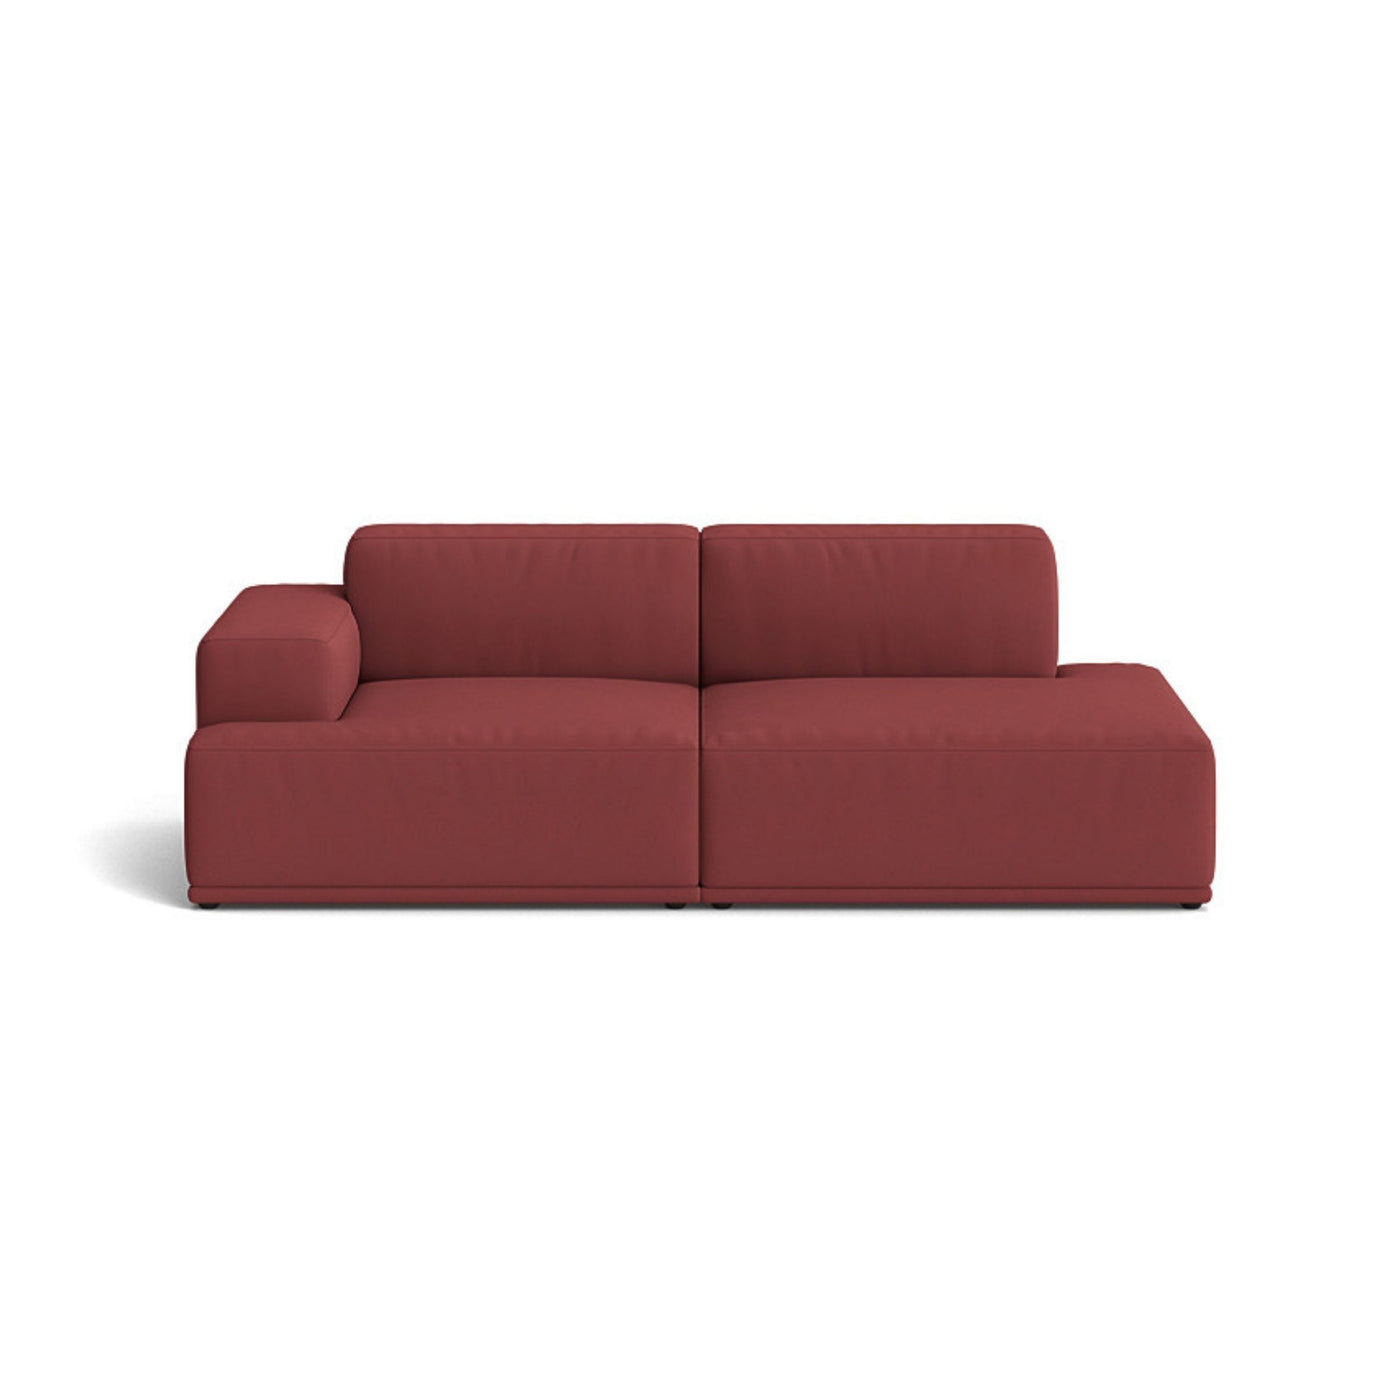 Muuto Connect Soft Modular 2 Seater Sofa, configuration 2. made-to-order from someday designs. #colour_rime-591